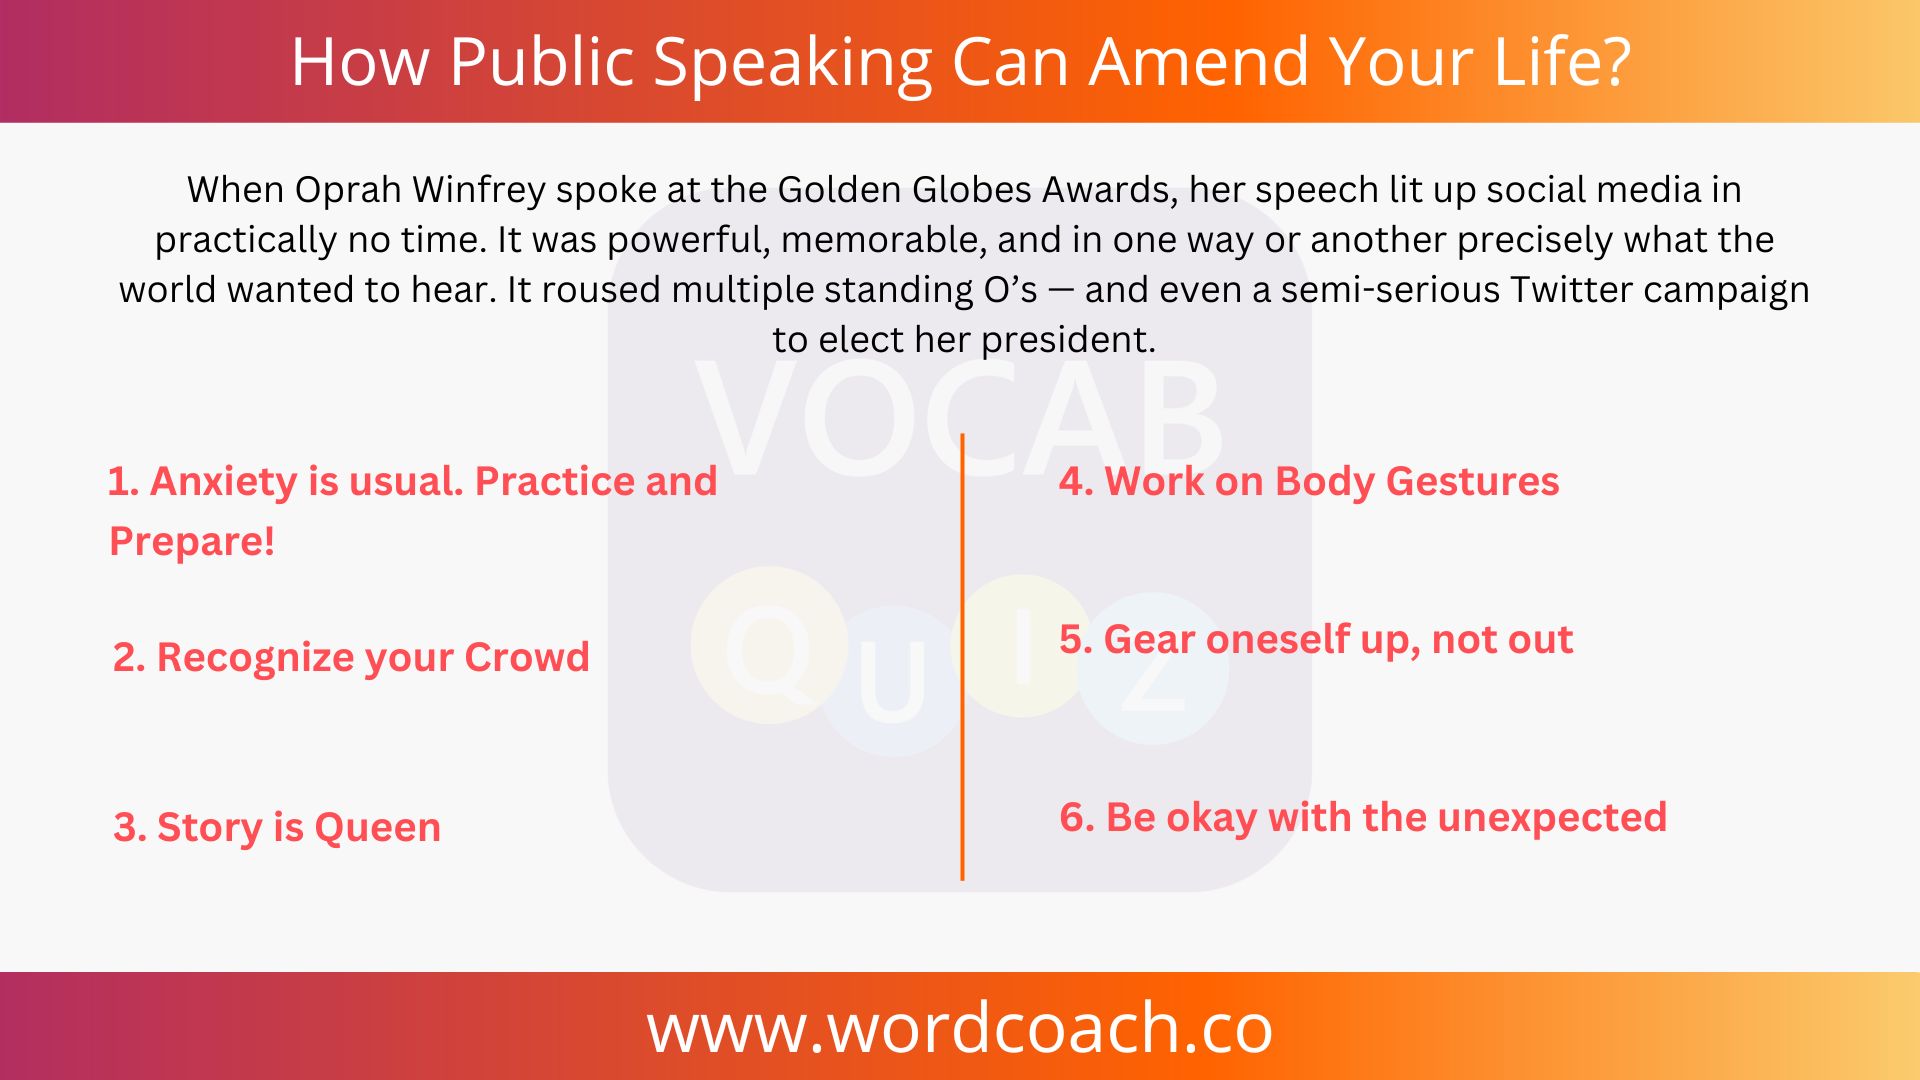 How Public Speaking Can Amend Your Life - wordcoach.co